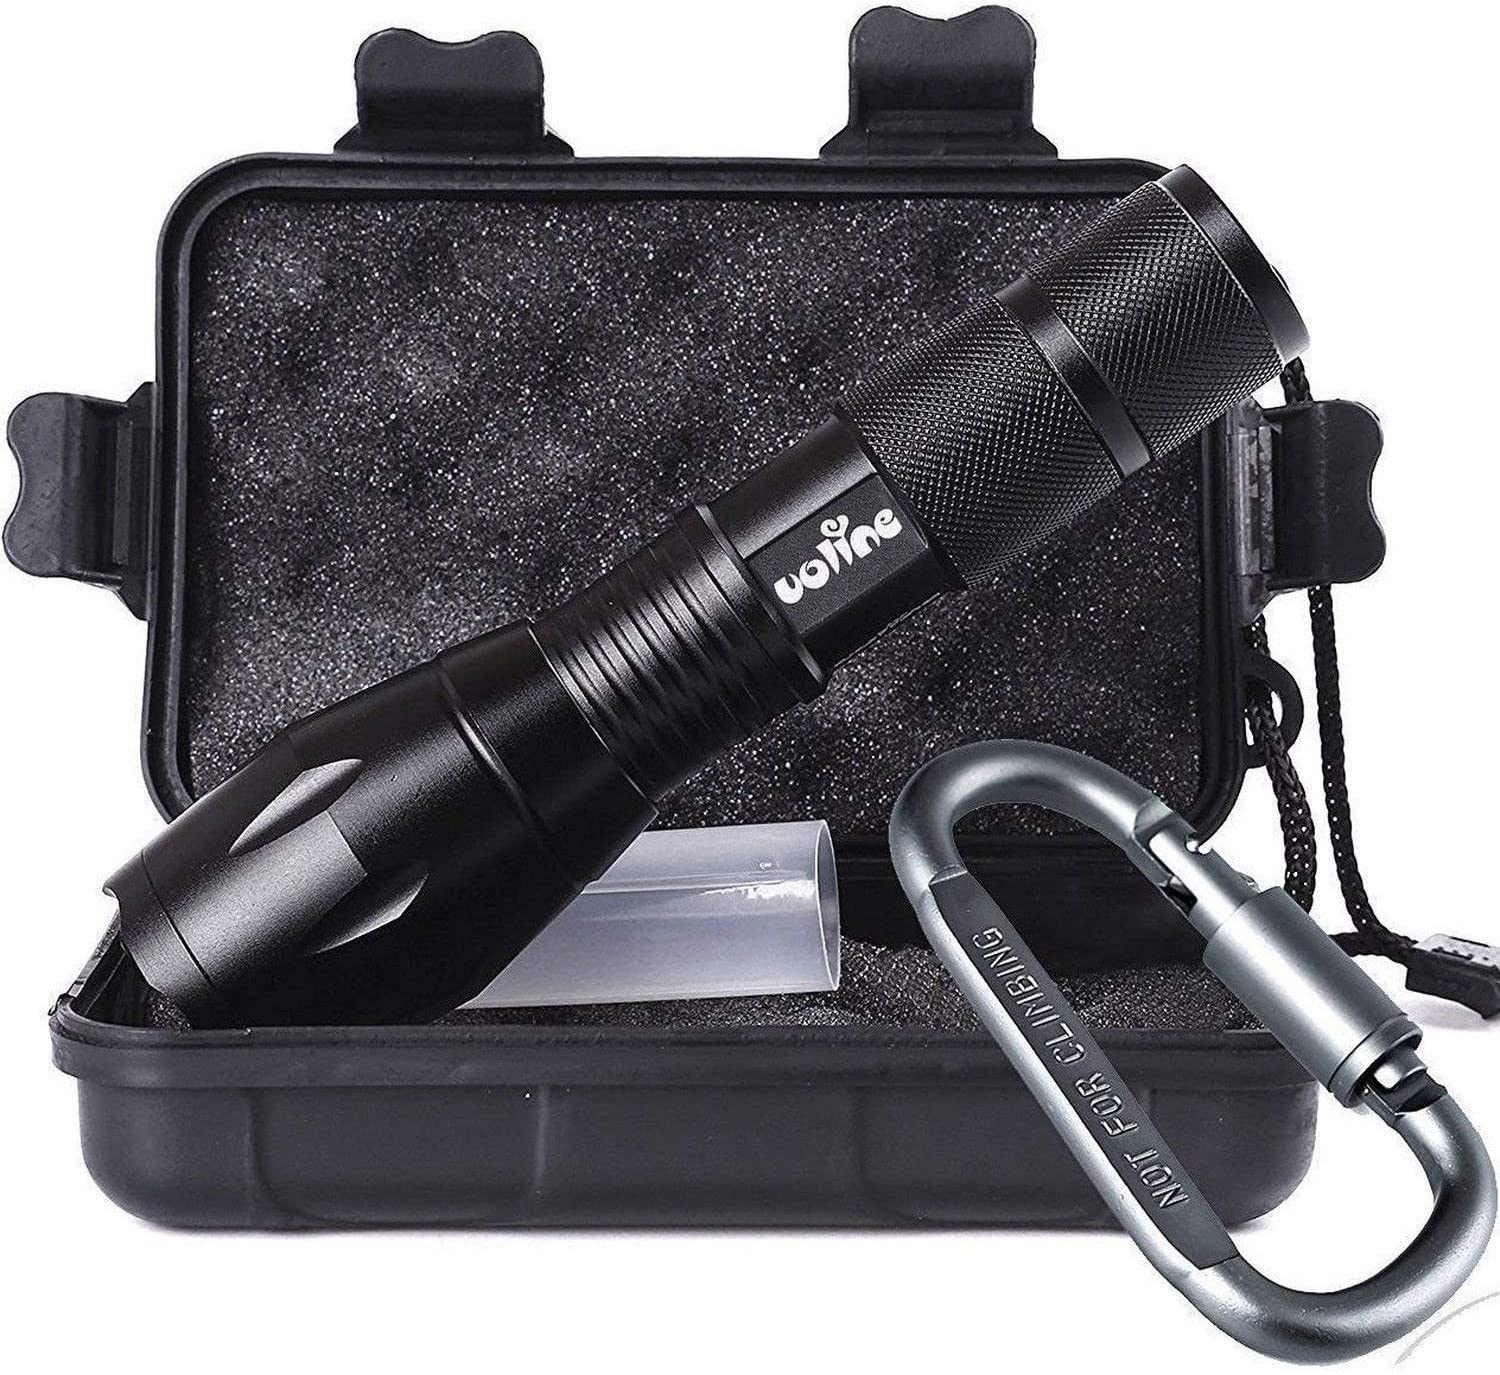 Tactical Portable LED Flashlight with High Lumens – Just $15.99 at Amazon